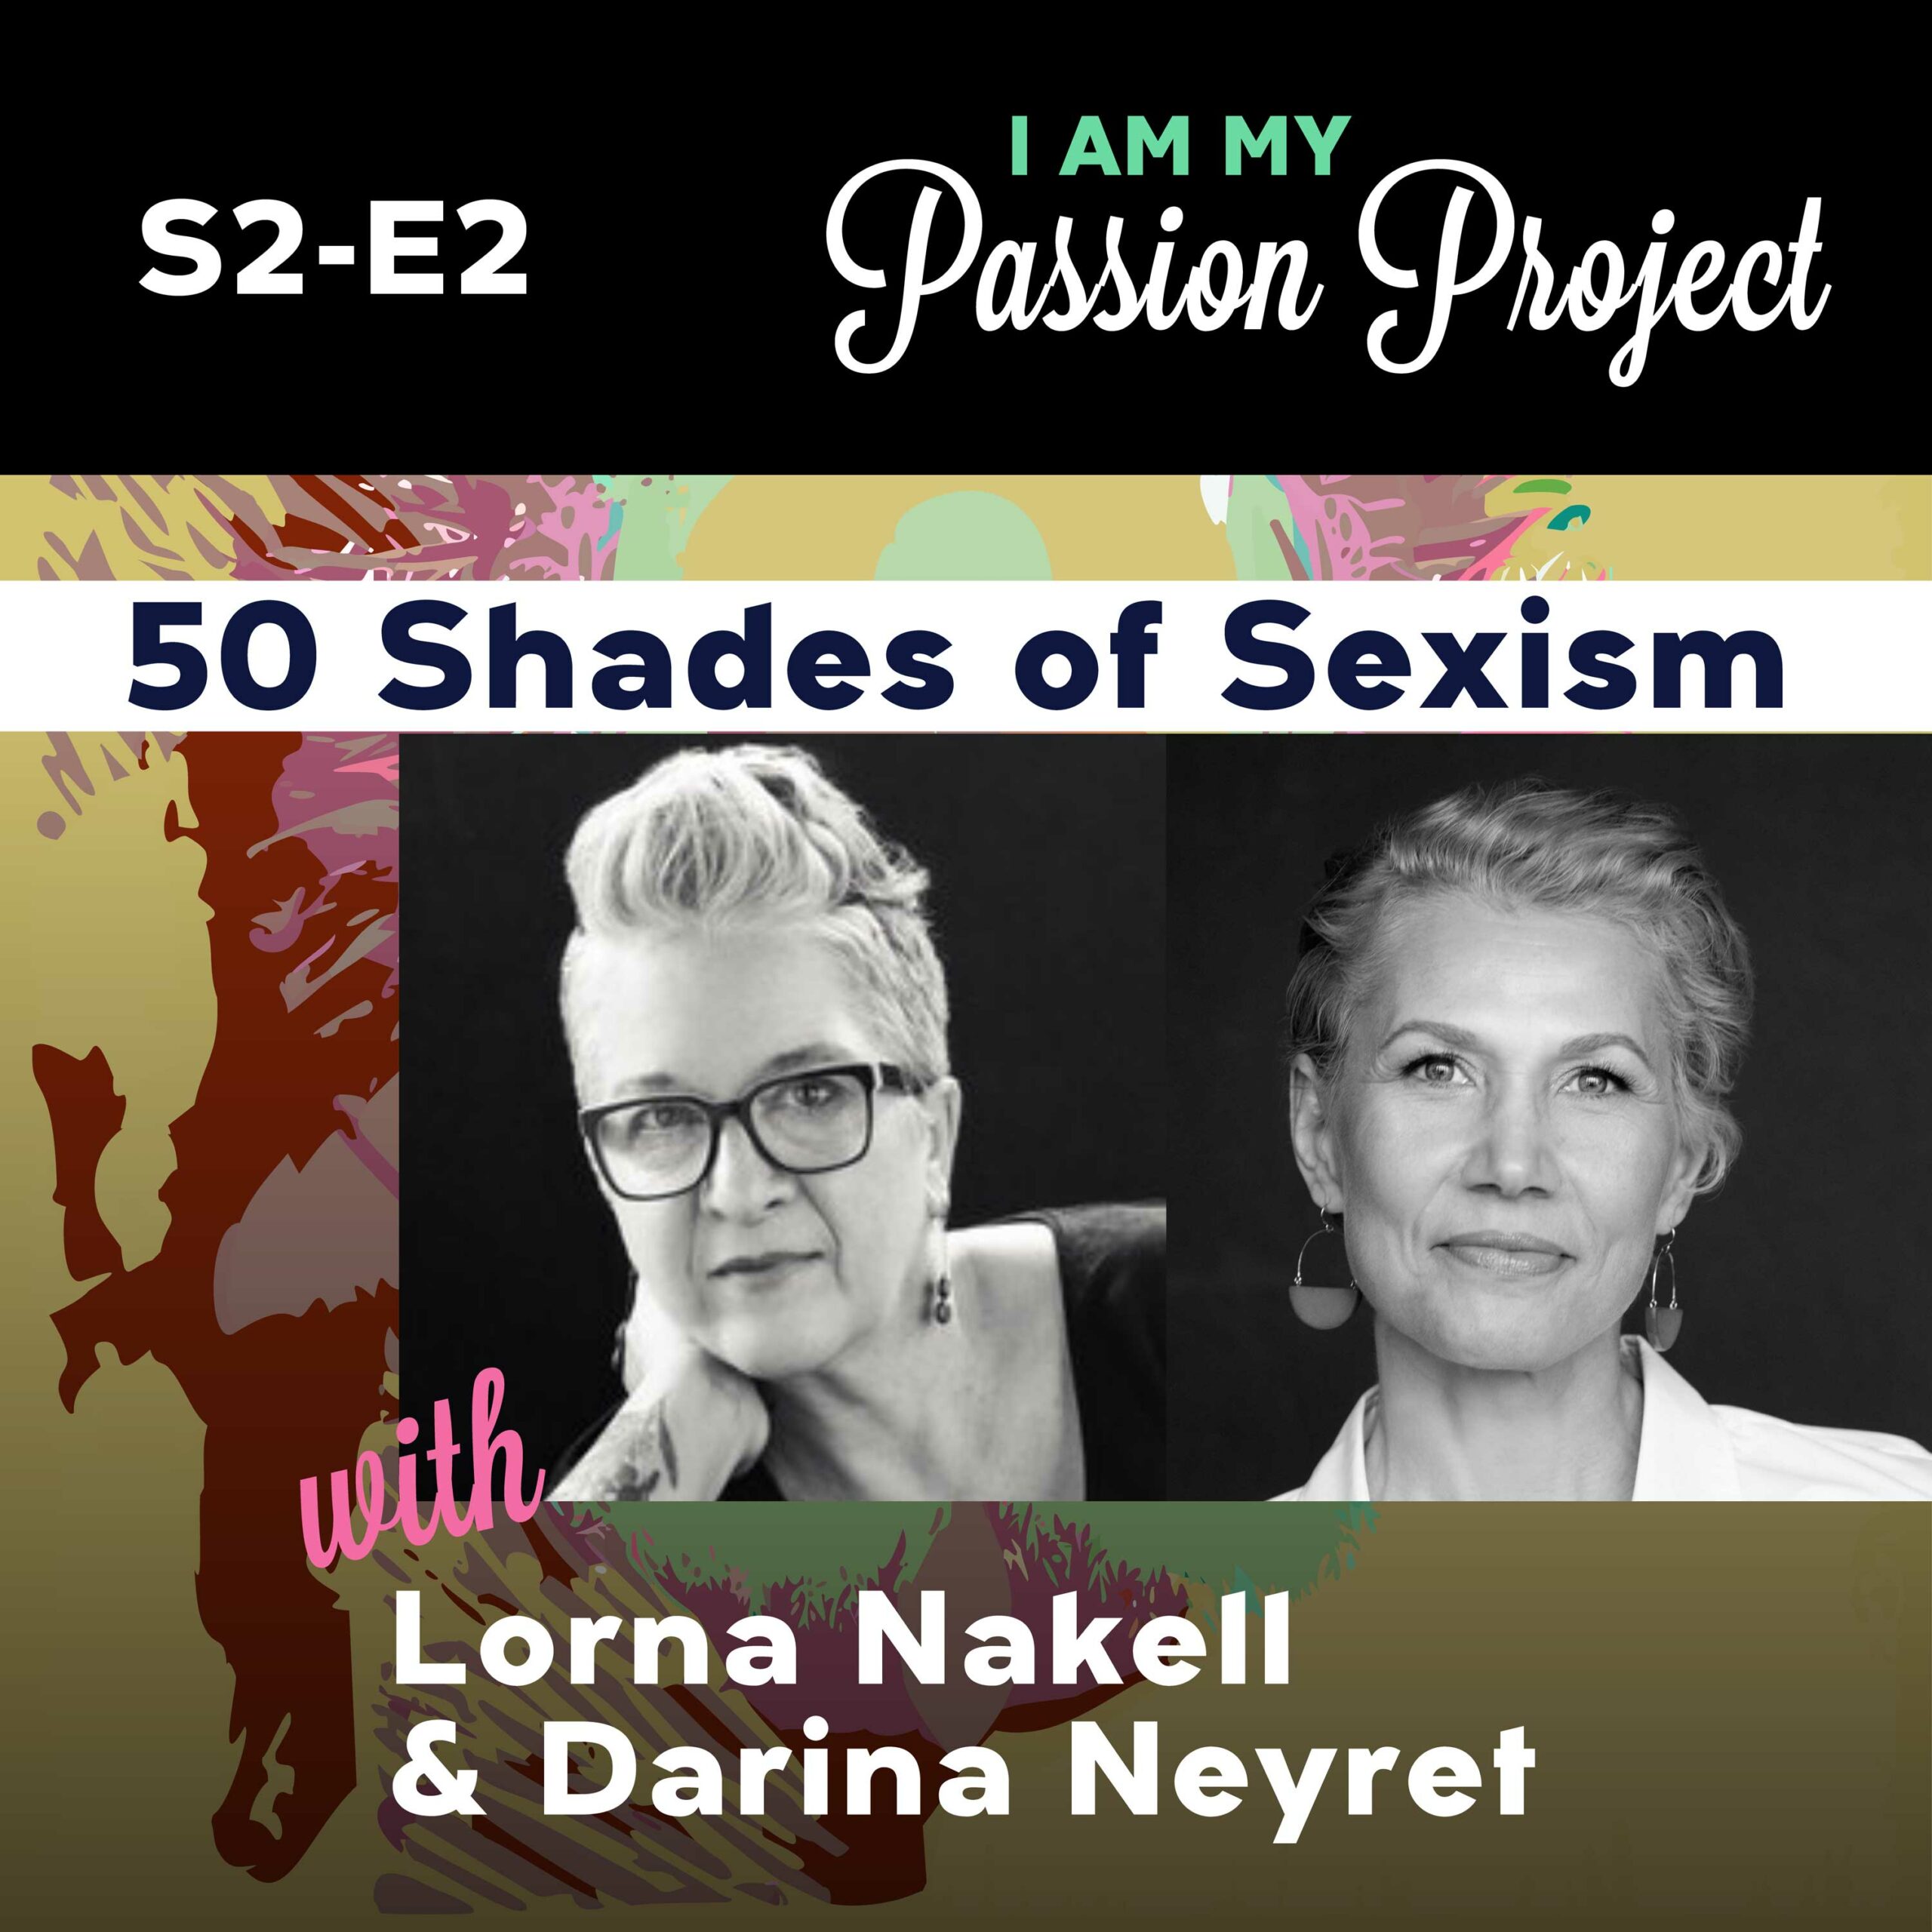 50 Shades of Sexism Reviews the Movie, Love Actually with Lorna Nakell and Darina Neyret